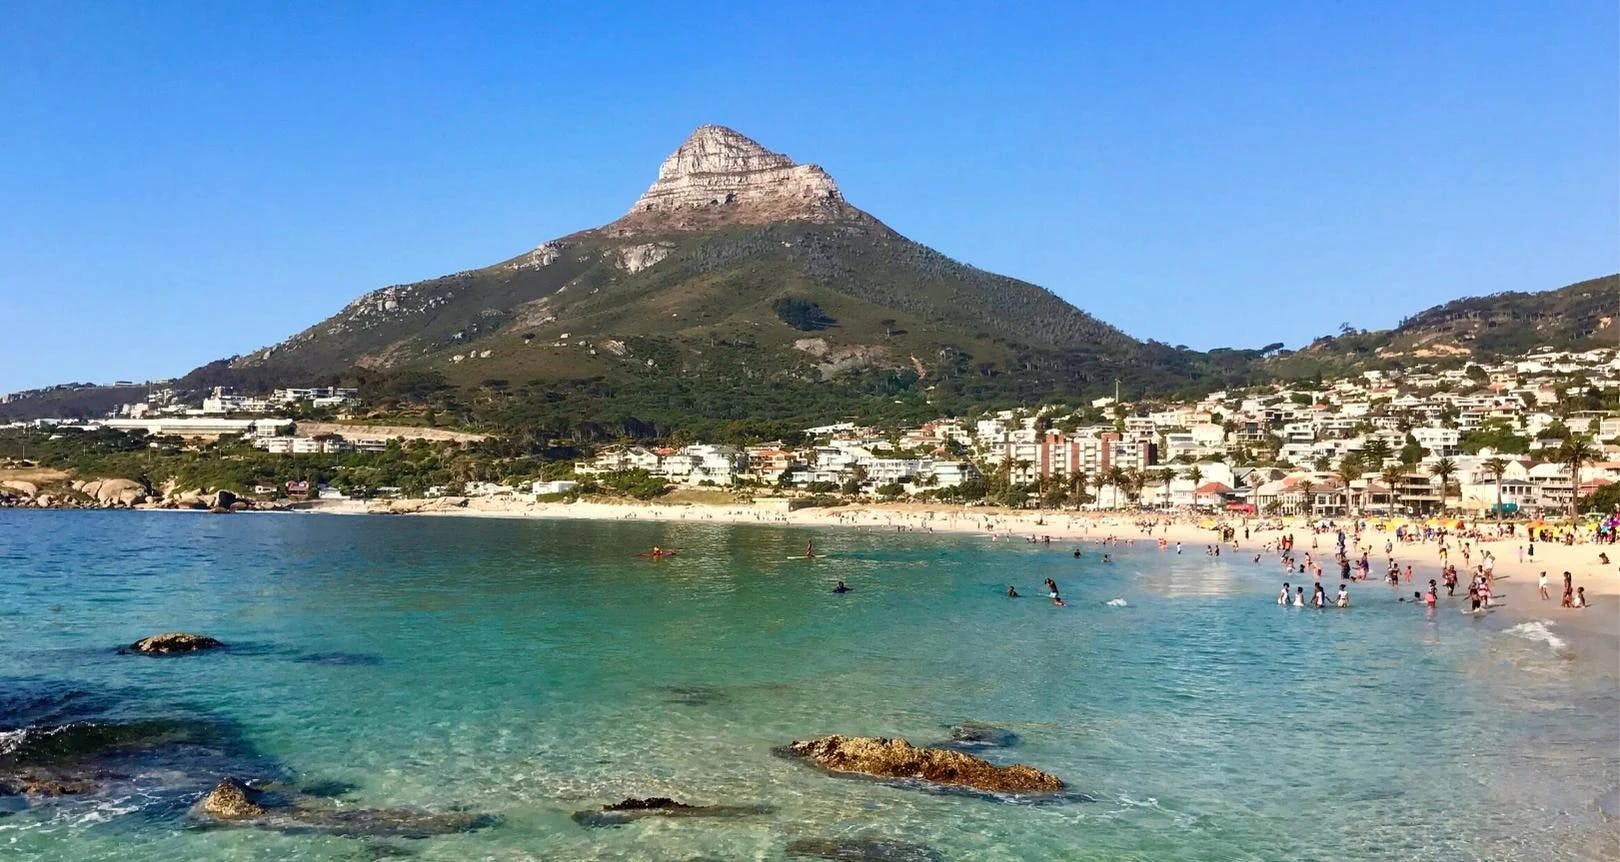 15 ways you can stay active while living and working in Cape Town